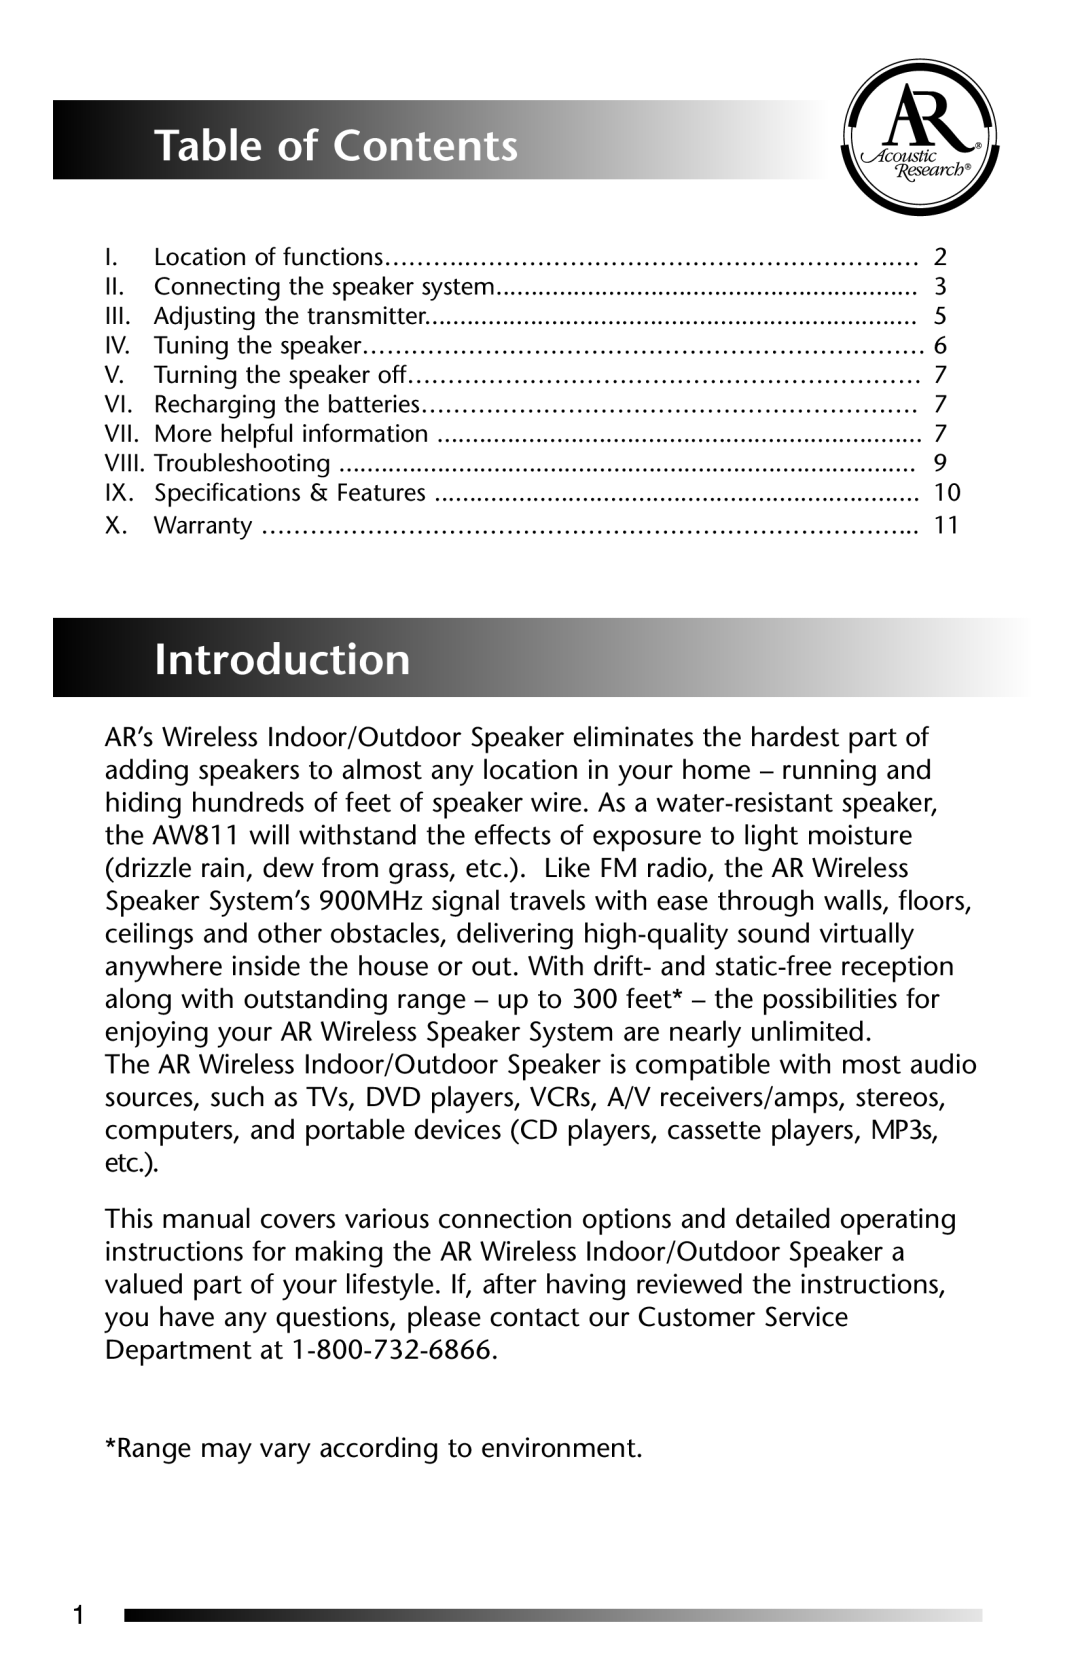 Acoustic Research AW-811 operation manual Table of Contents, Introduction 